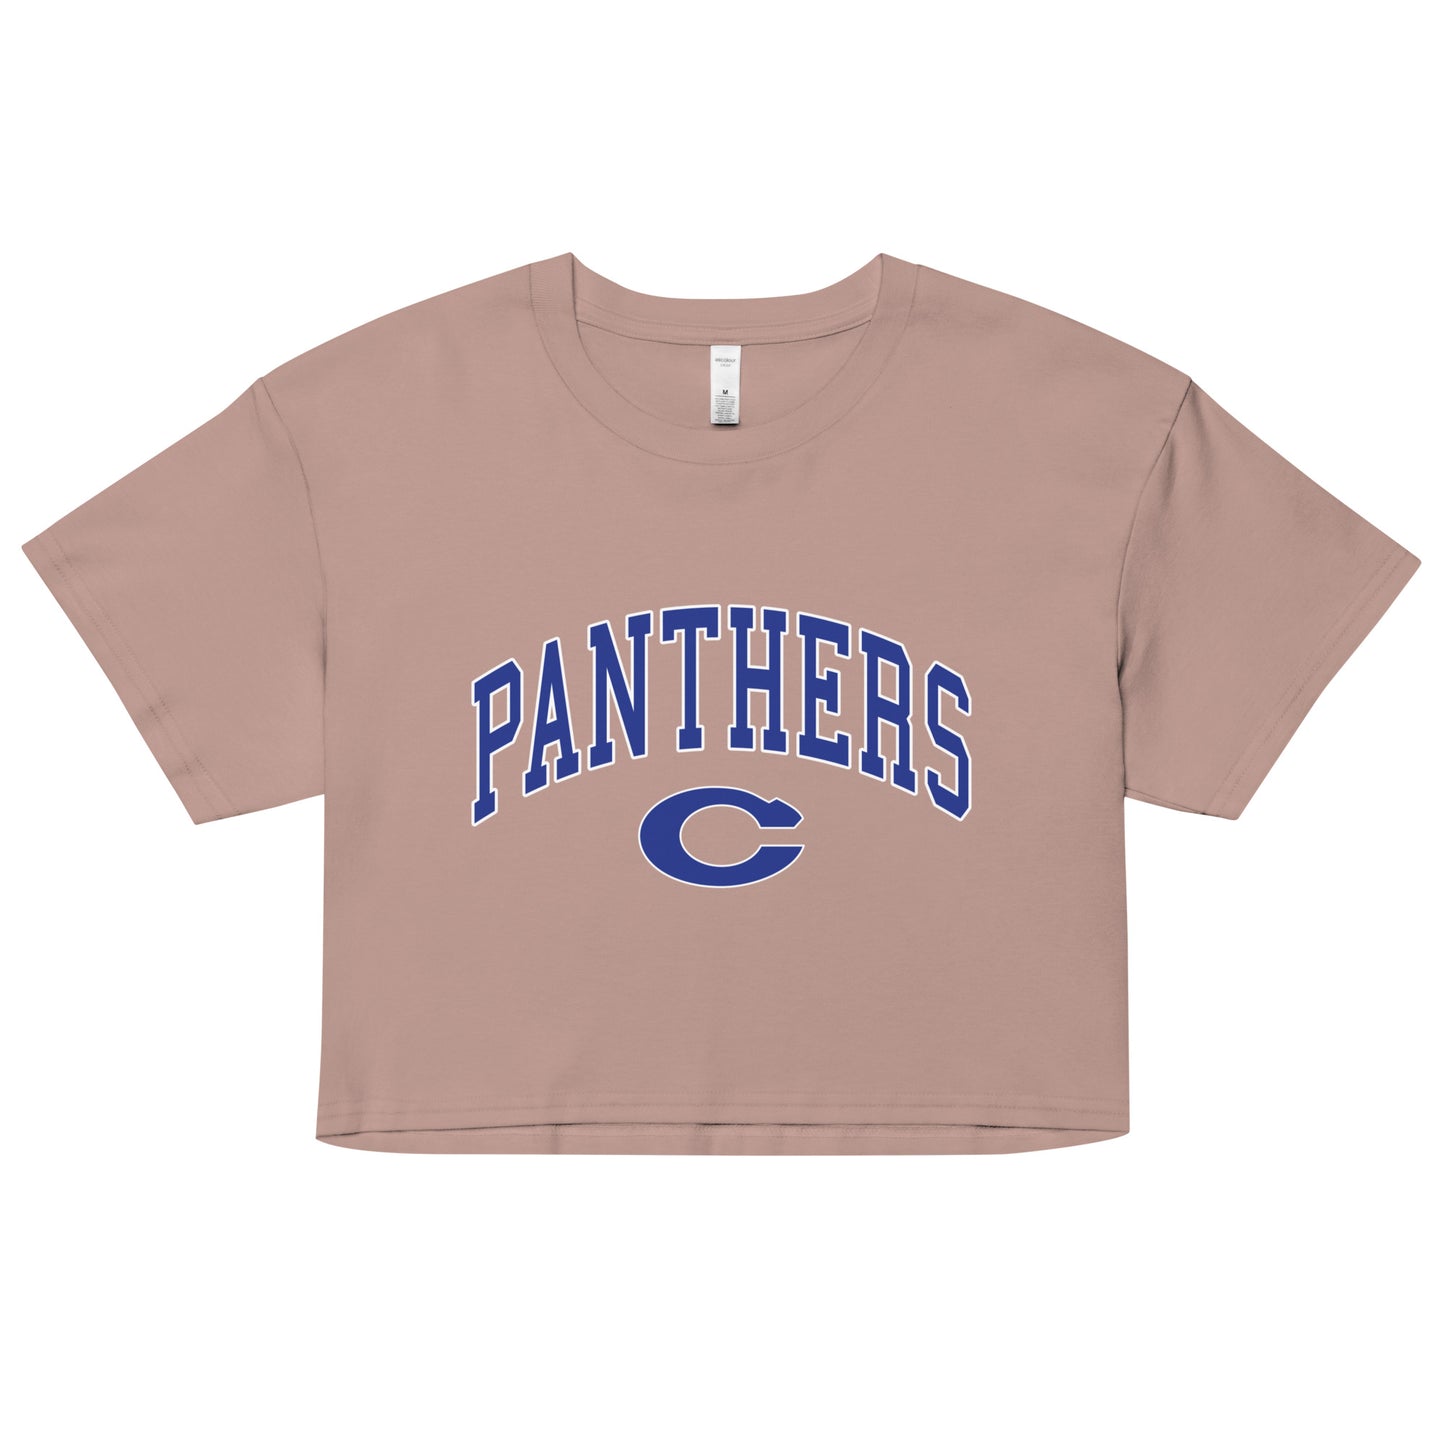 Panthers Cropped Tee